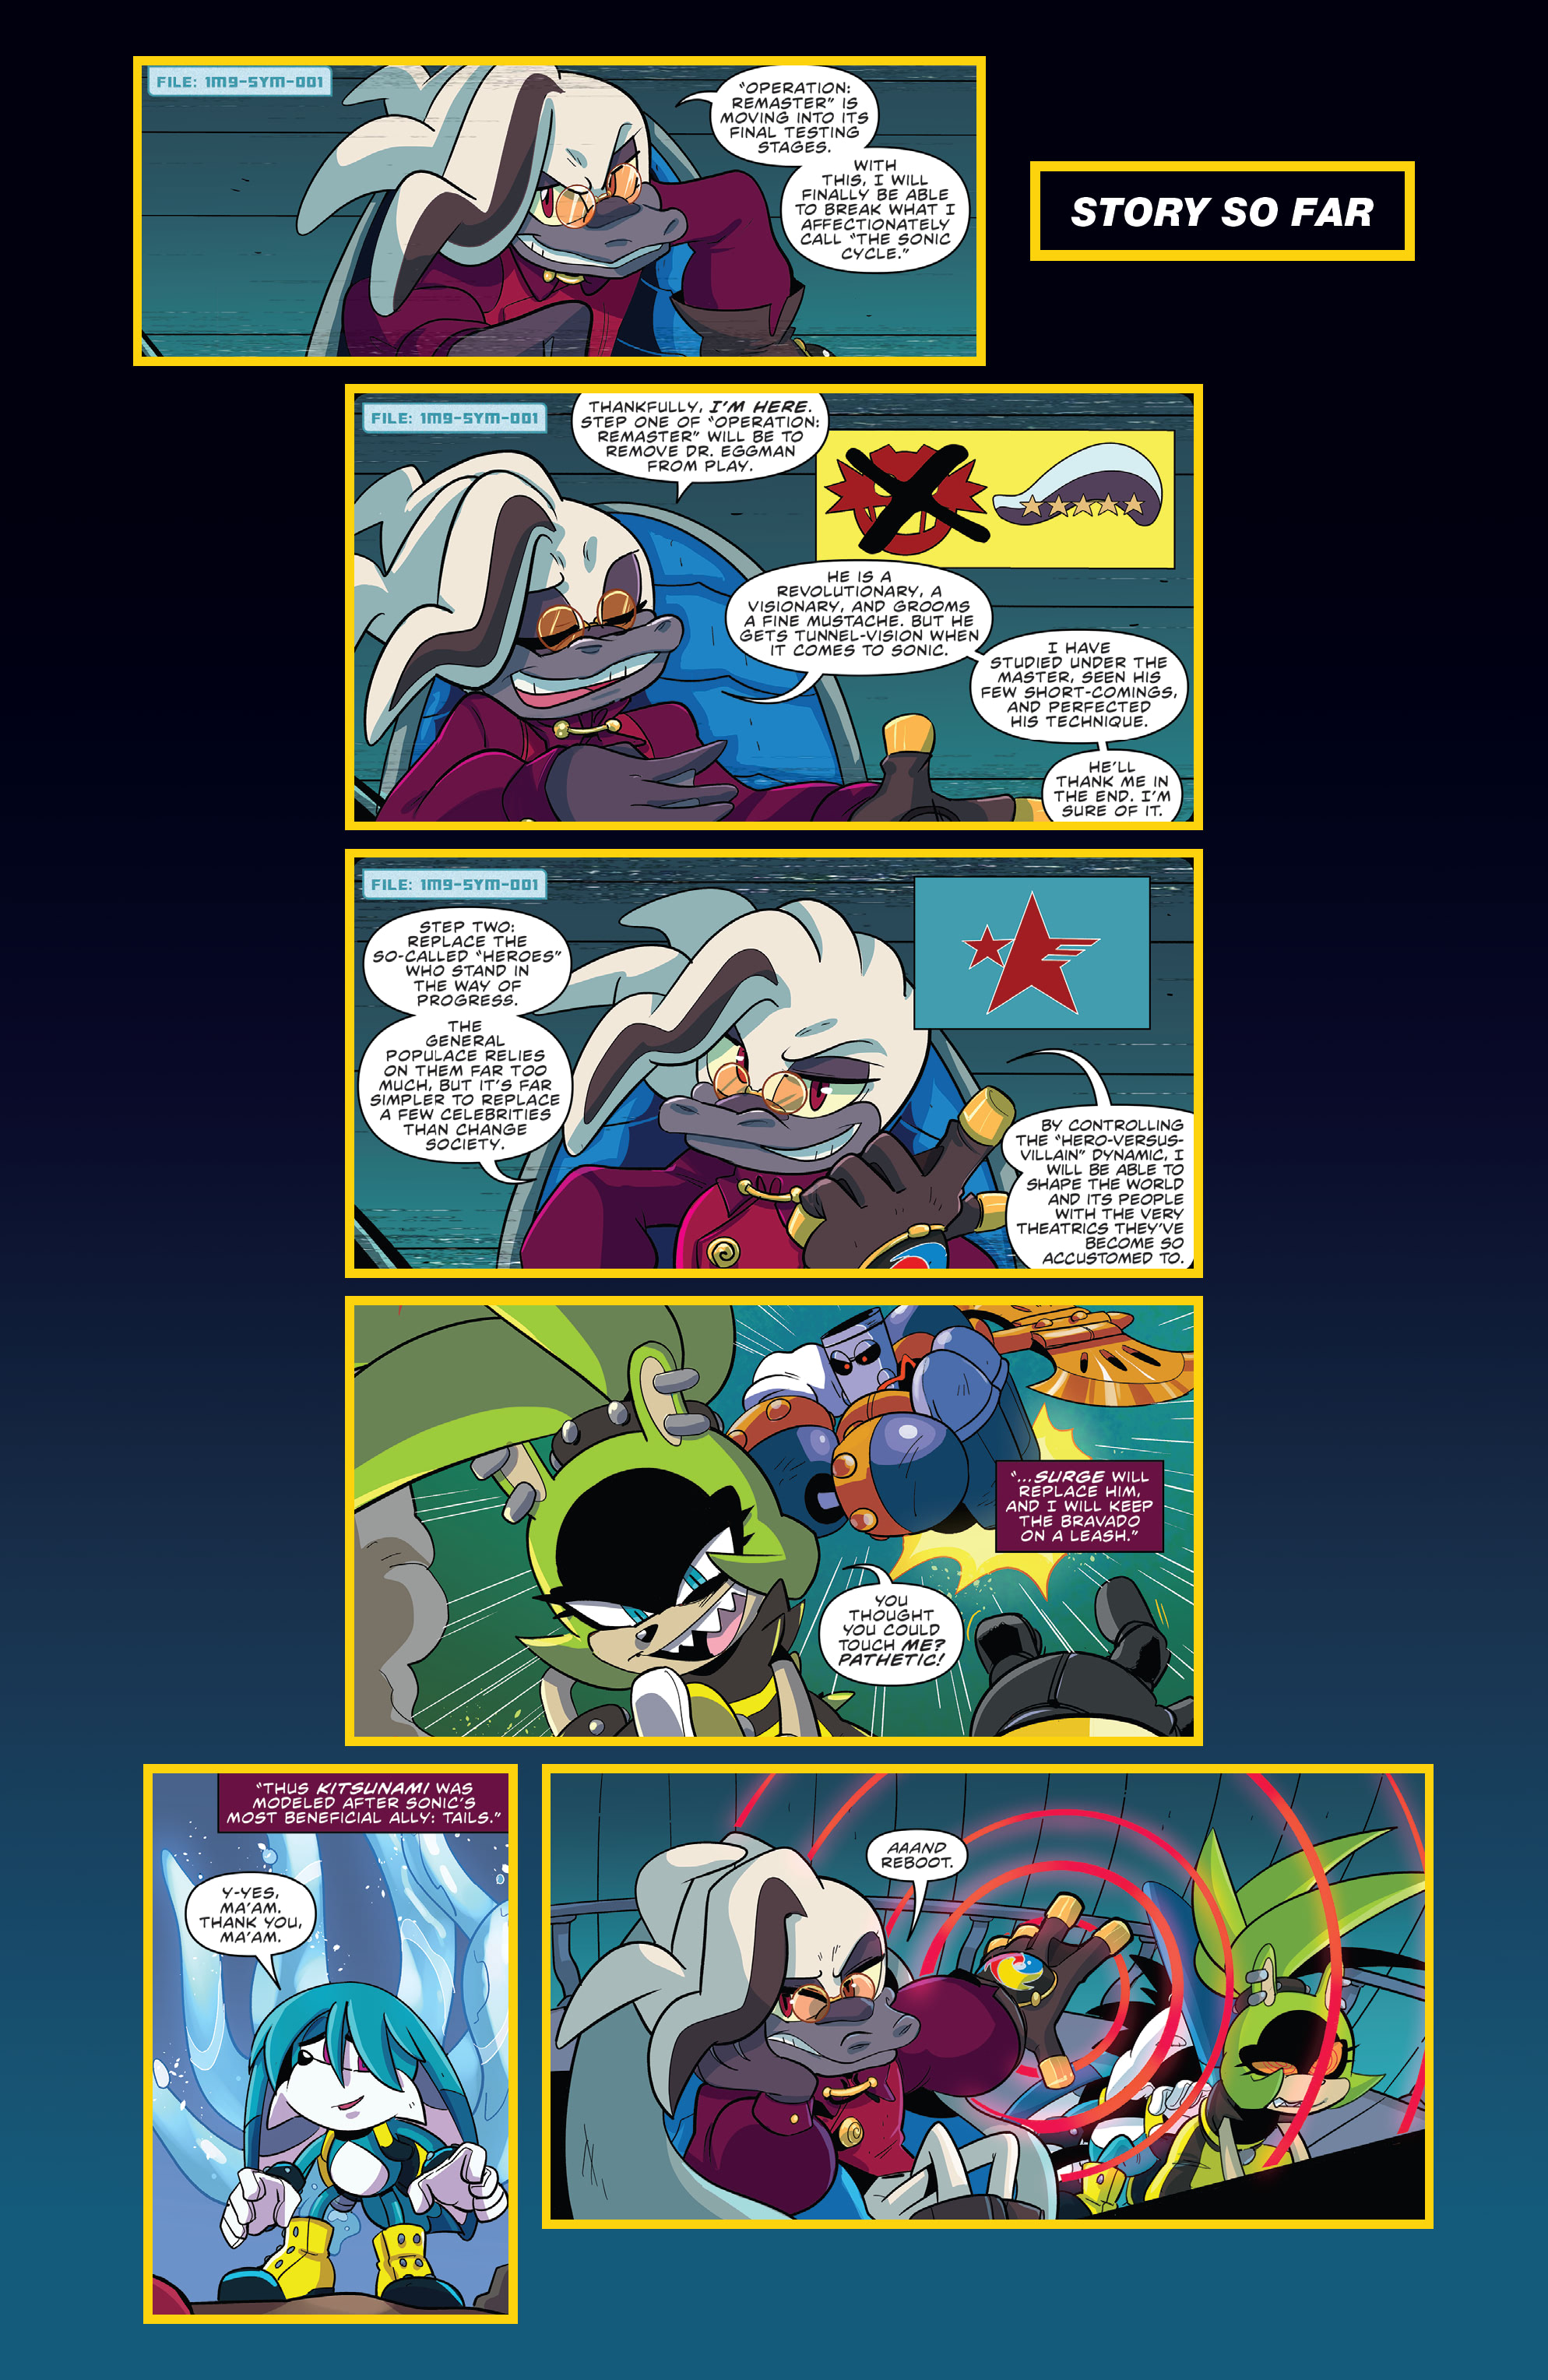 Sonic The Hedgehog Imposter Syndrome 2021 Chapter 2 Page 3 